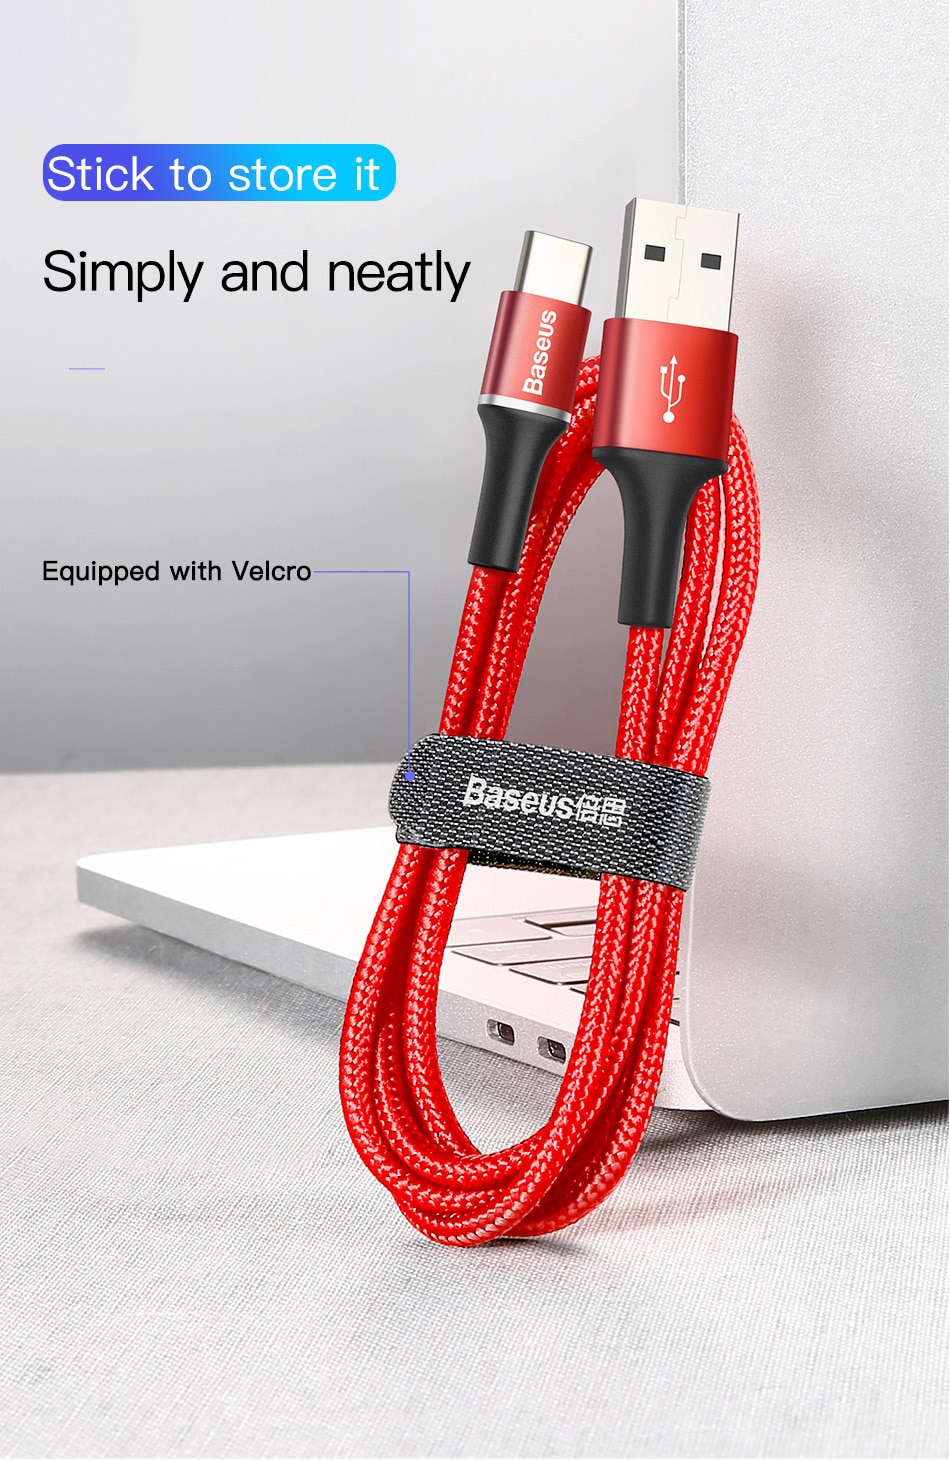 Baseus 3A USB Type C Cable Fast Chagring Charger Type-c Cable For Samsung S10 S9 Xiaomi Mi 9 8 Oneplus 6t 6 5t USB C Data Cable